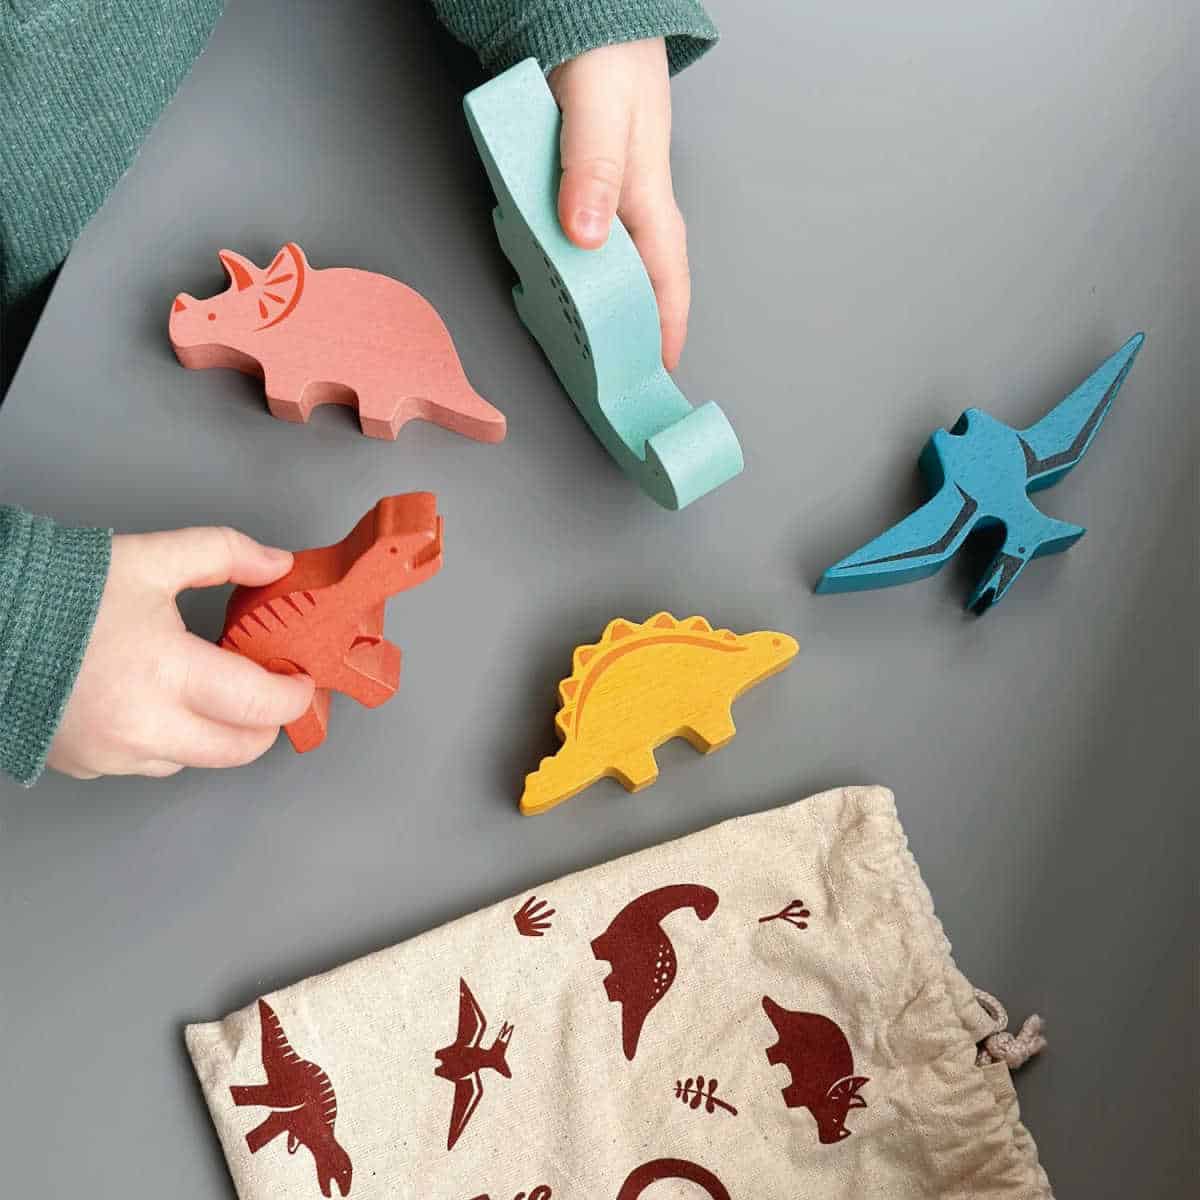 Child playing with sustainable wooden dinosaurs game